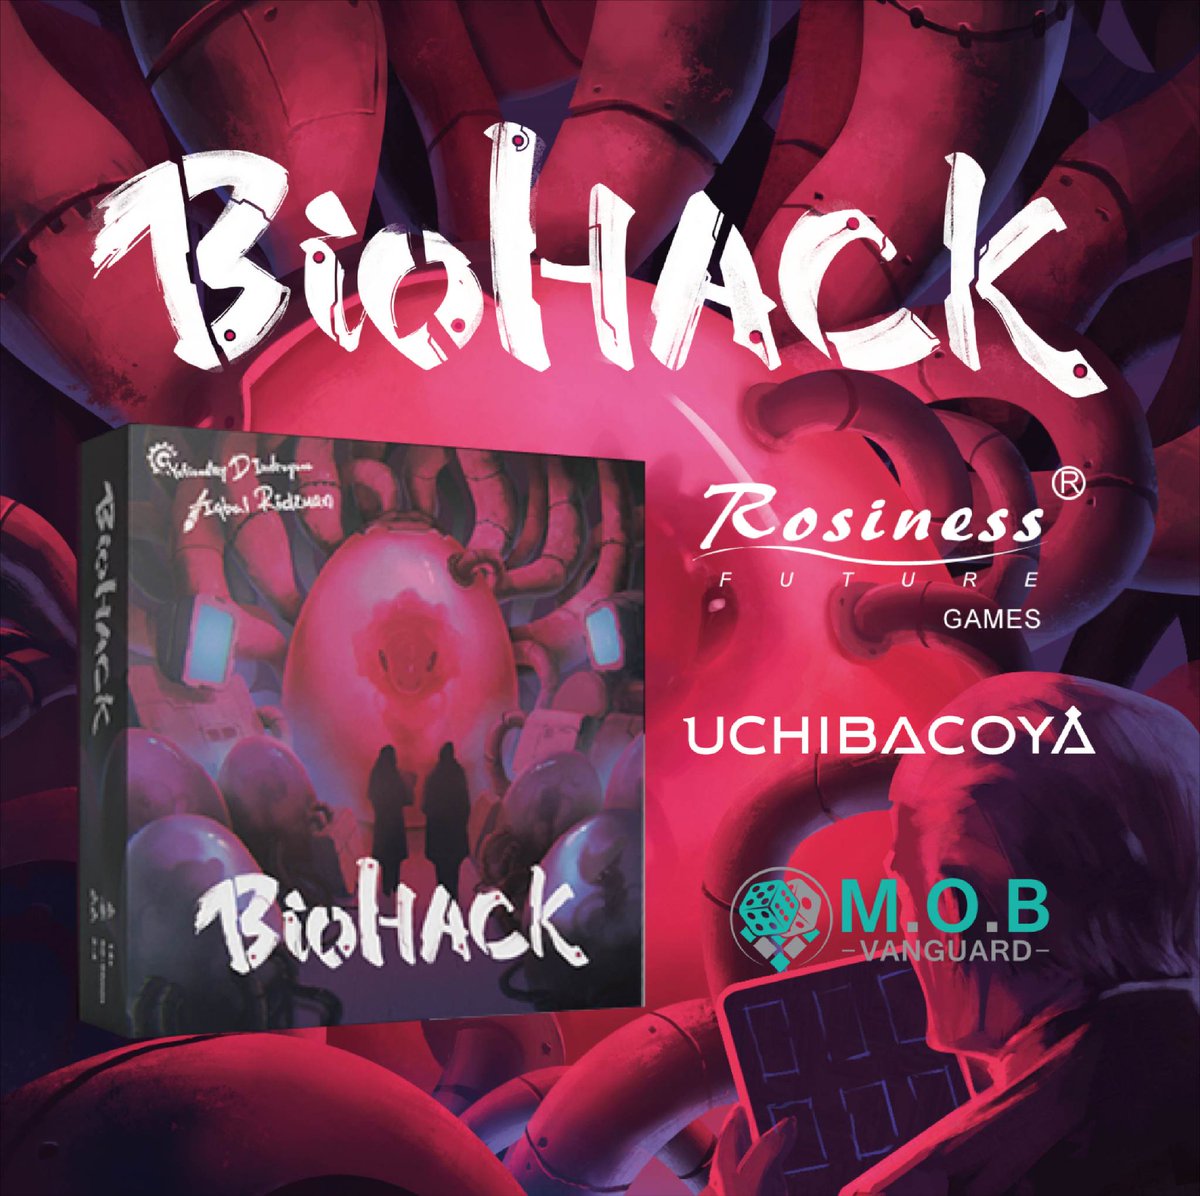 We are very happy to announce that @uchibacoya's newest project, the incredibly crunchy euro Biohack, has been signed by Rosiness Future Games for the Chinese market!

Biohack will launch its @Kickstarter campaign very soon!

#mobvanguard #licensing #proudagent #boardgame #bgg